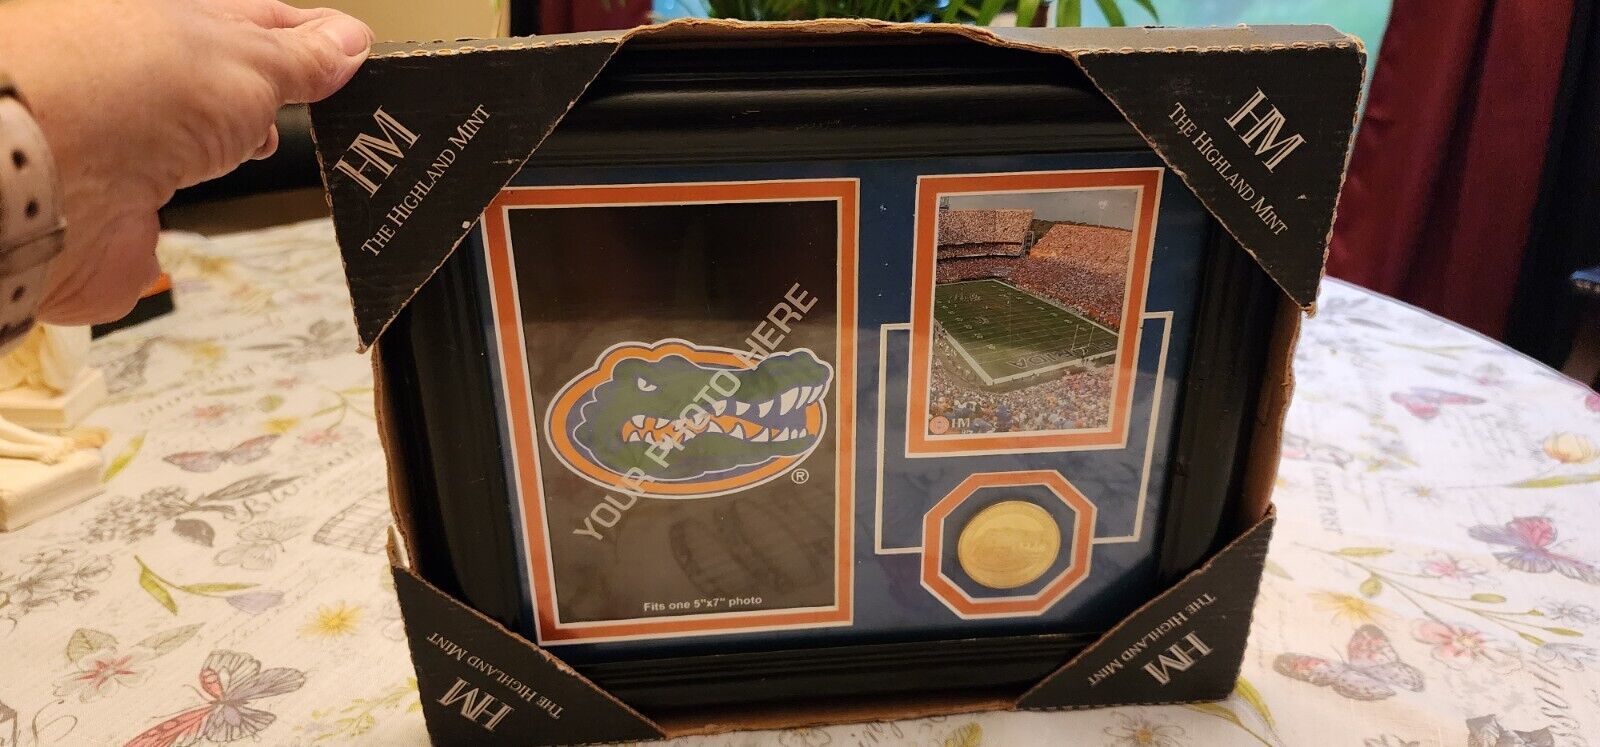 Univ Of Fla Gator Frame And Gold Coin RARE FIND Made In USA HIGHLAND MINT NIB